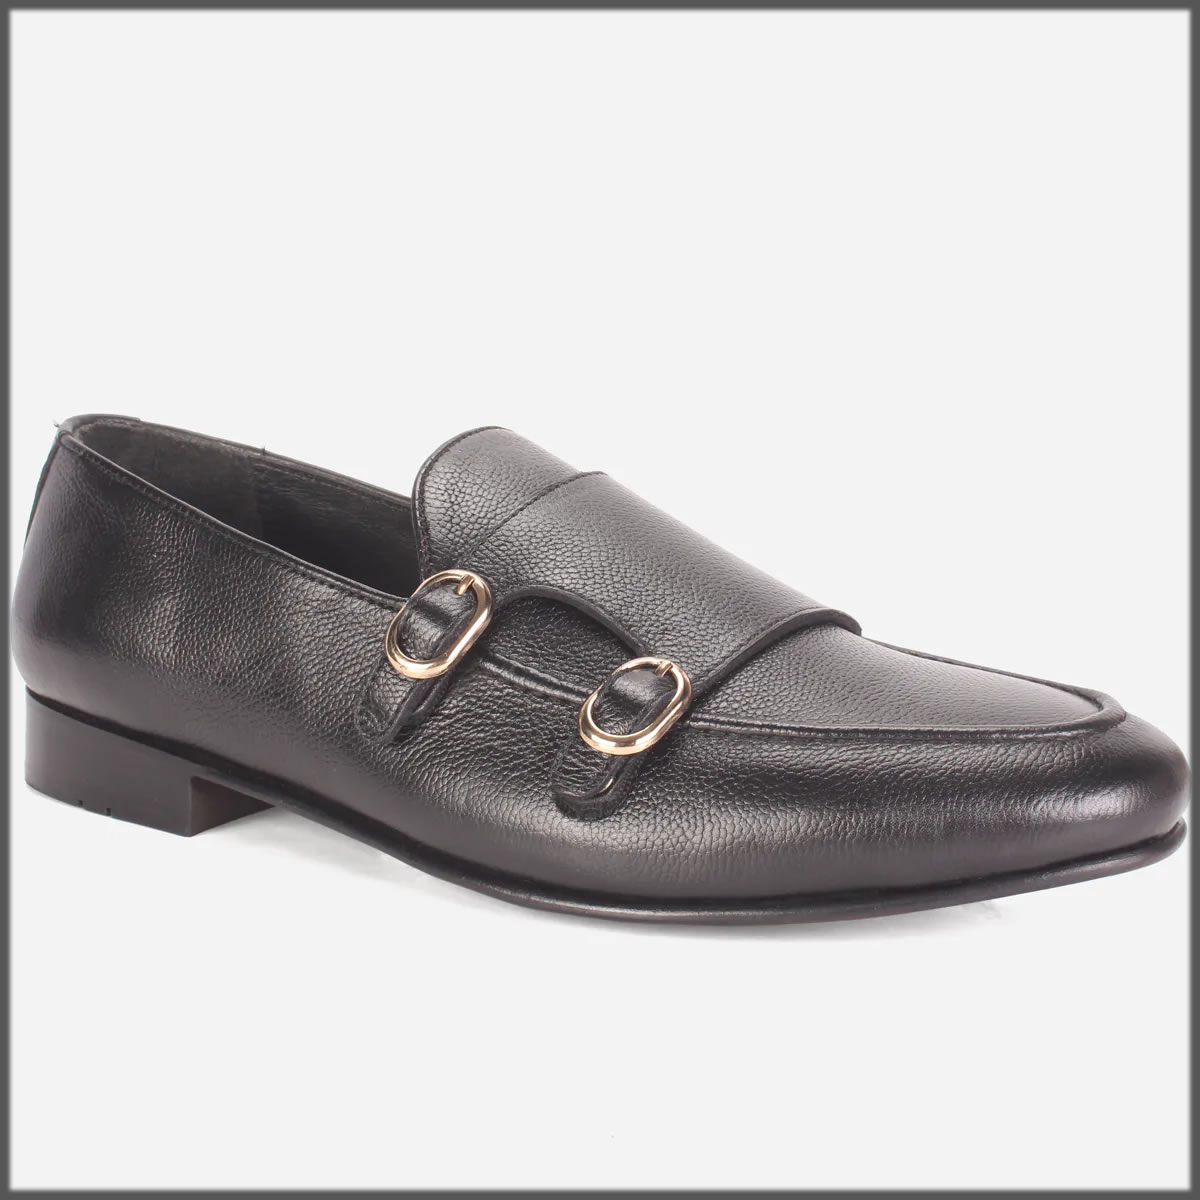 Leather Monk Straps Formal Shoes